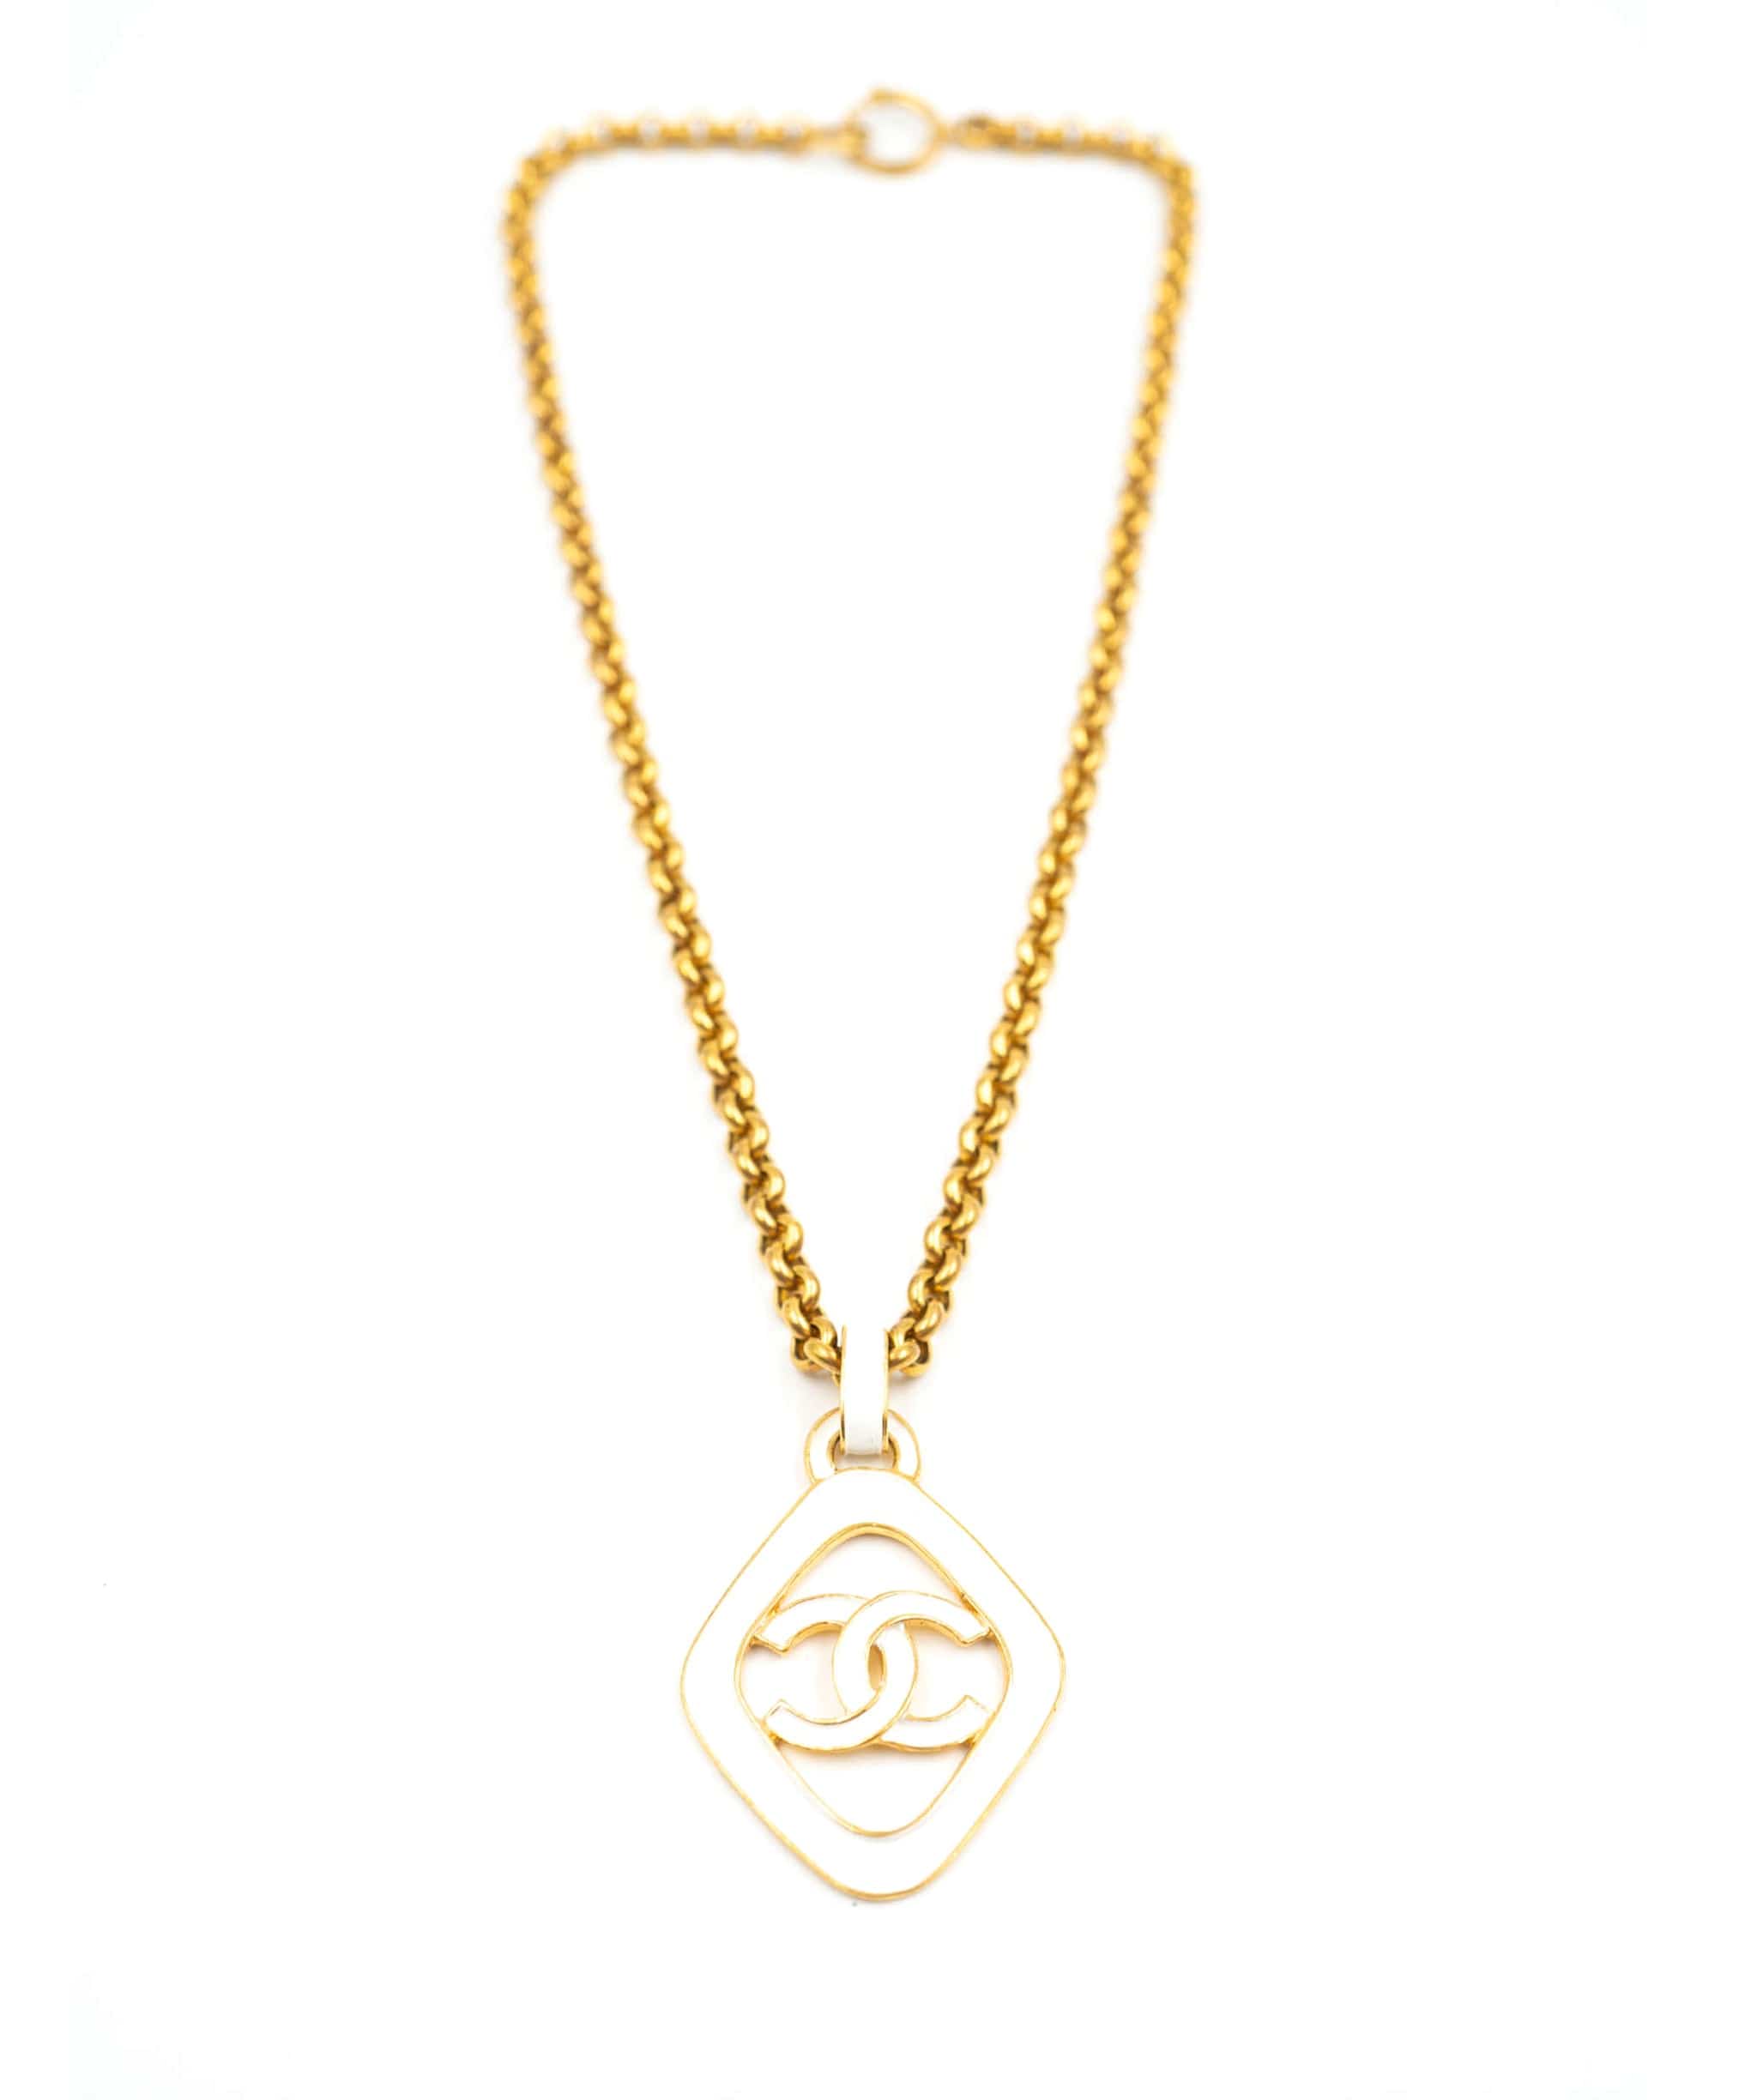 Chanel Vintage Chanel chain necklace with white enamel CC logo pendant, from 93 C - AGL2128